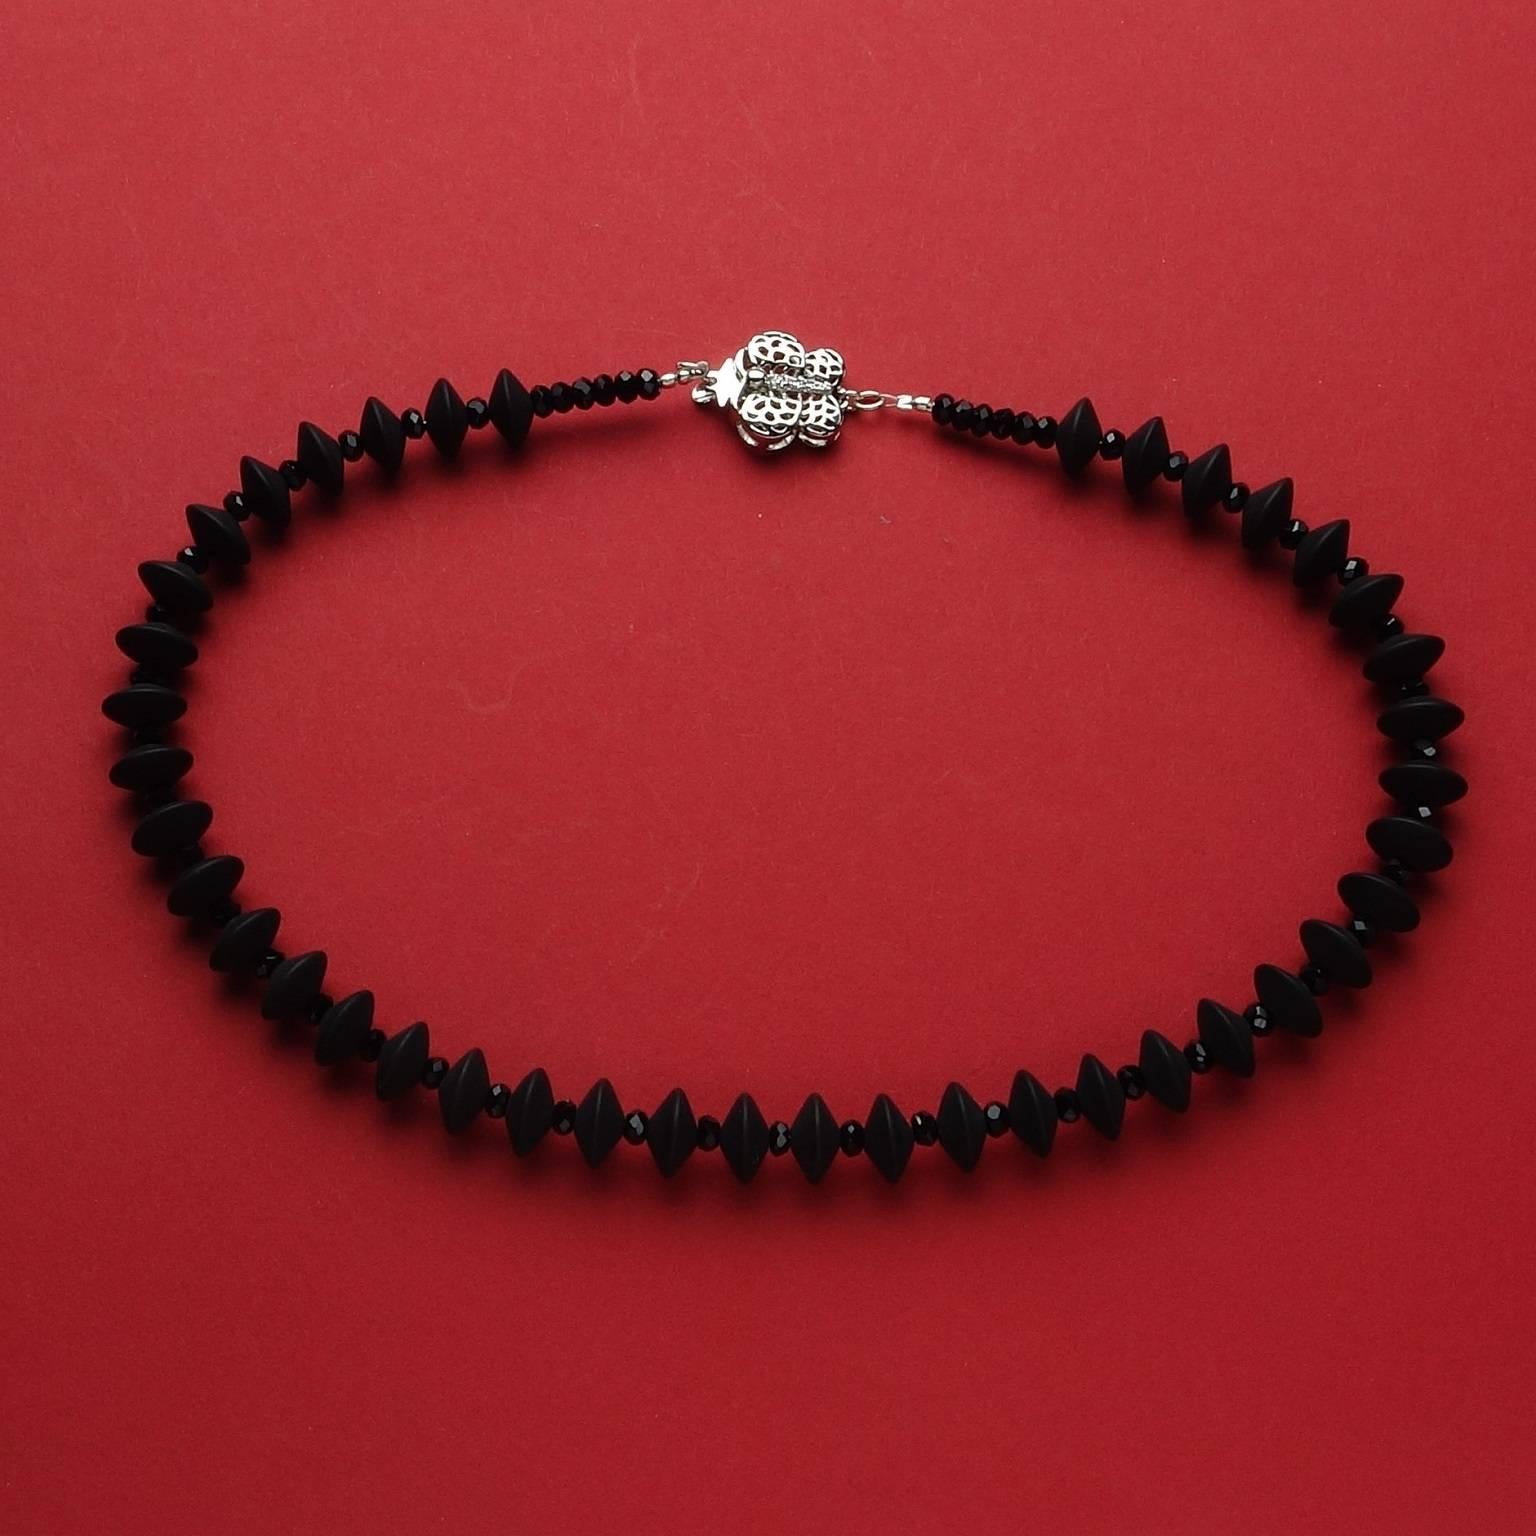 Bead AJD Black Onyx and Black Spinel Choker Necklace